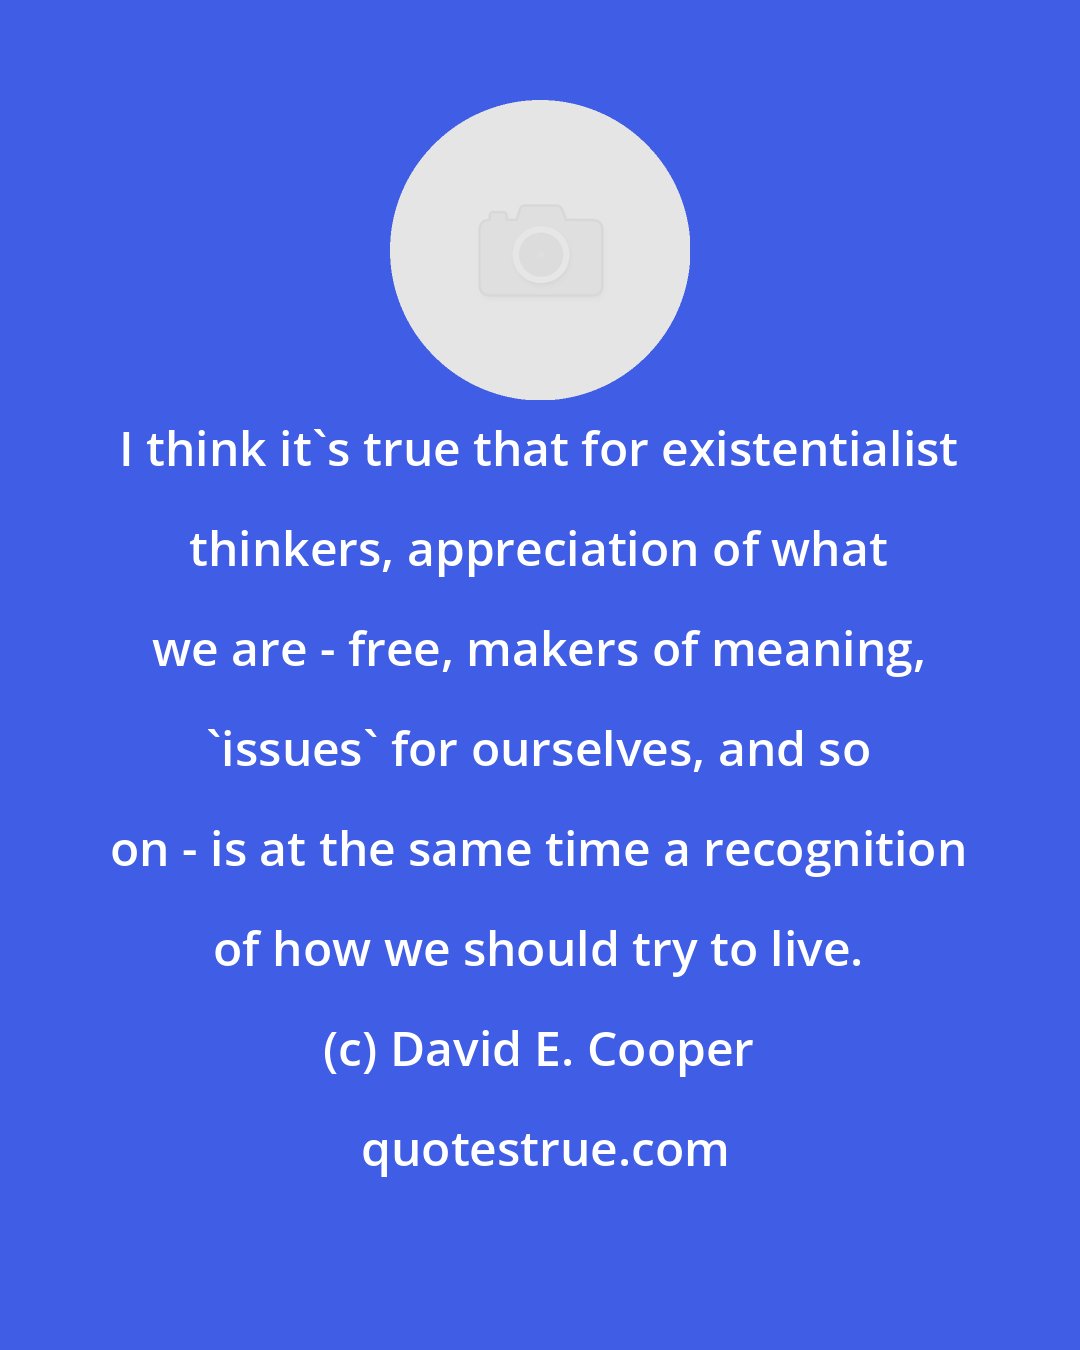 David E. Cooper: I think it's true that for existentialist thinkers, appreciation of what we are - free, makers of meaning, 'issues' for ourselves, and so on - is at the same time a recognition of how we should try to live.